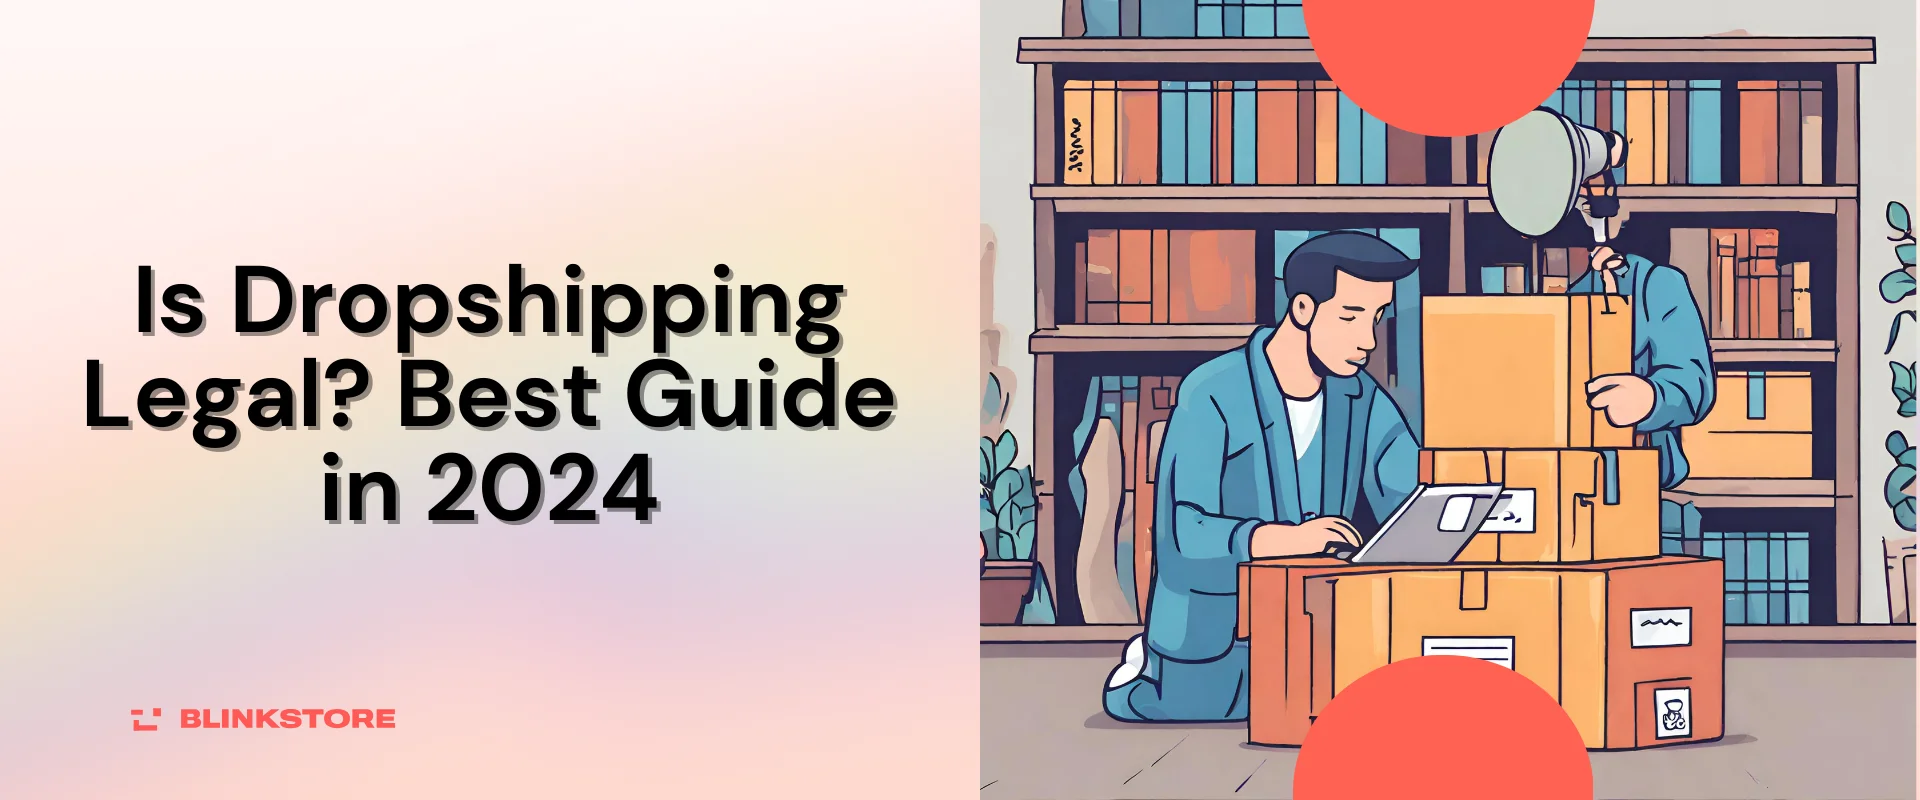 Is Dropshipping Legal? Best Guide in 2024